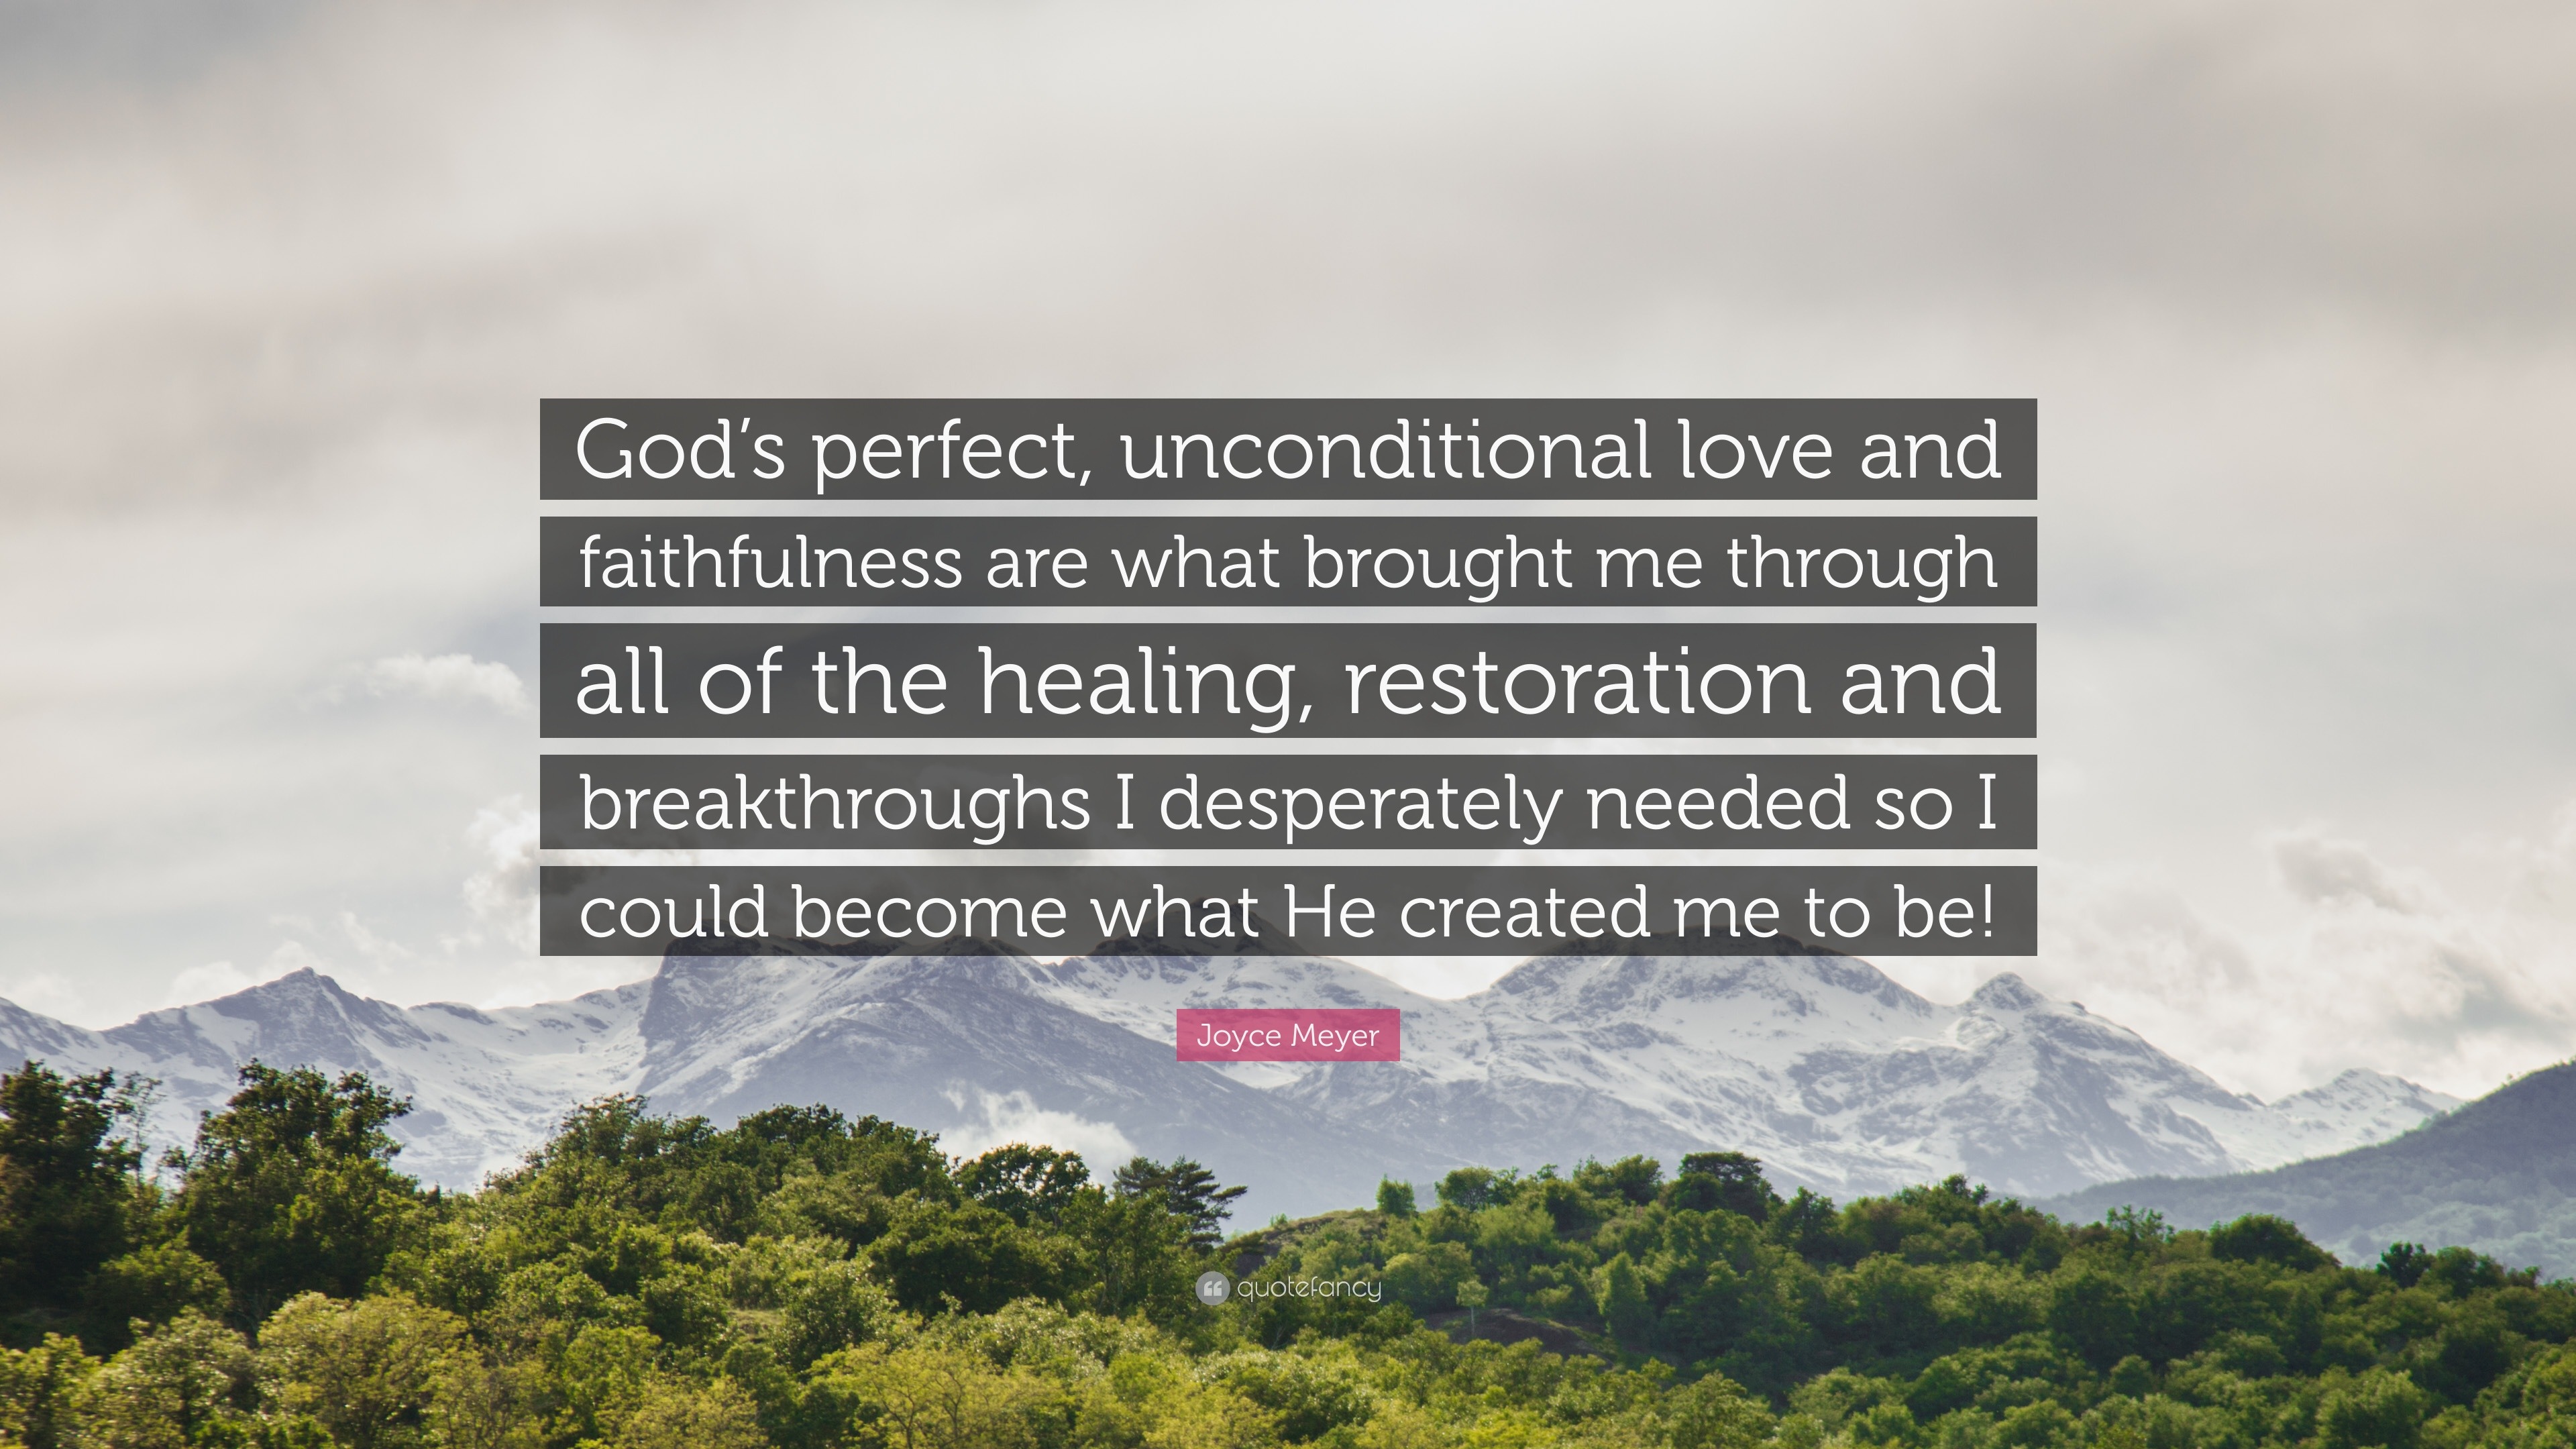 Joyce Meyer Quote “God s perfect unconditional love and faithfulness are what brought me